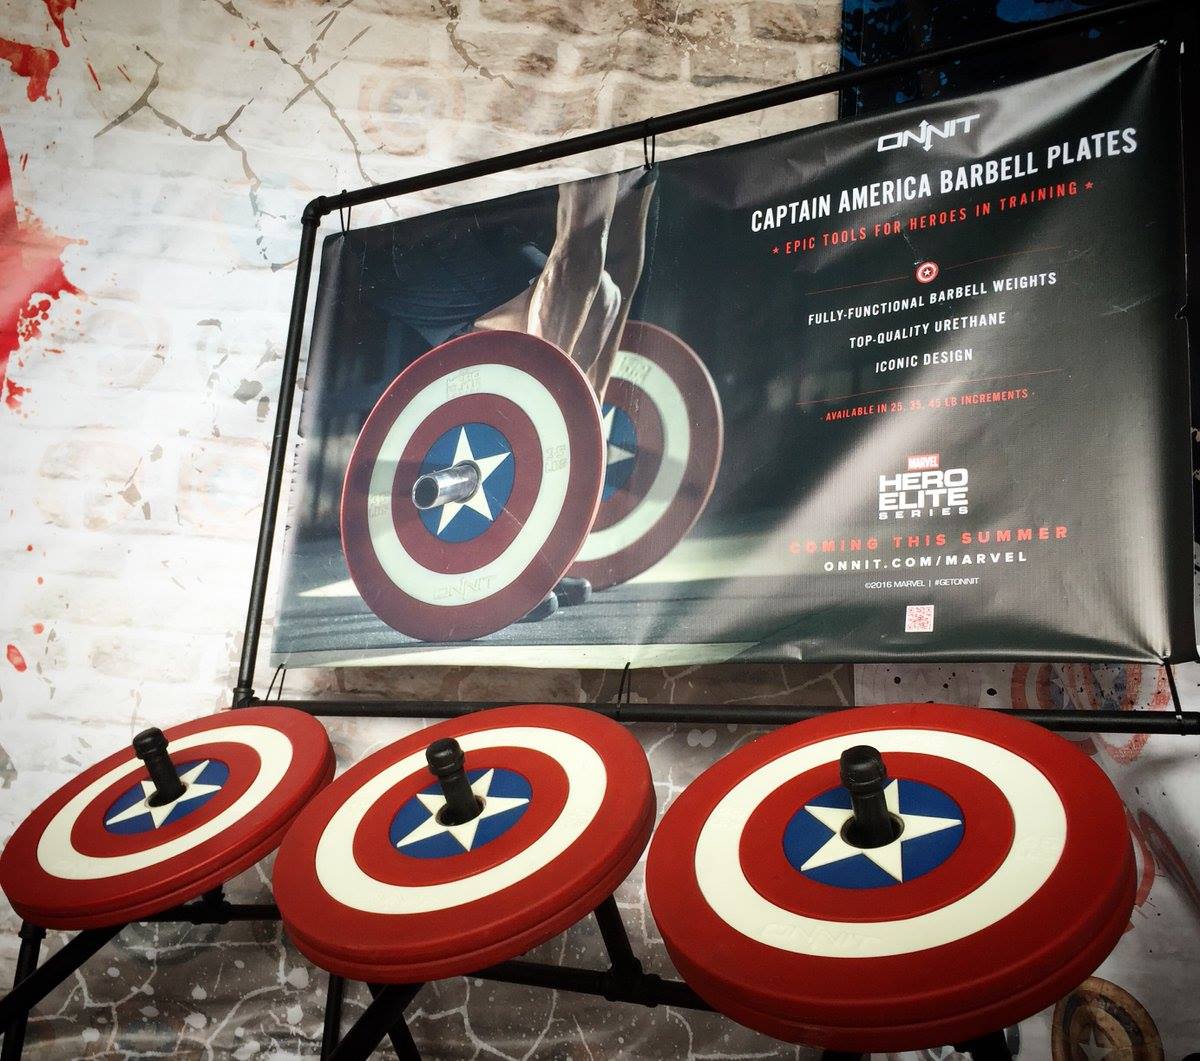 onnit captain marvel barbells Marvel Captain America Weights Set Coming This Summer